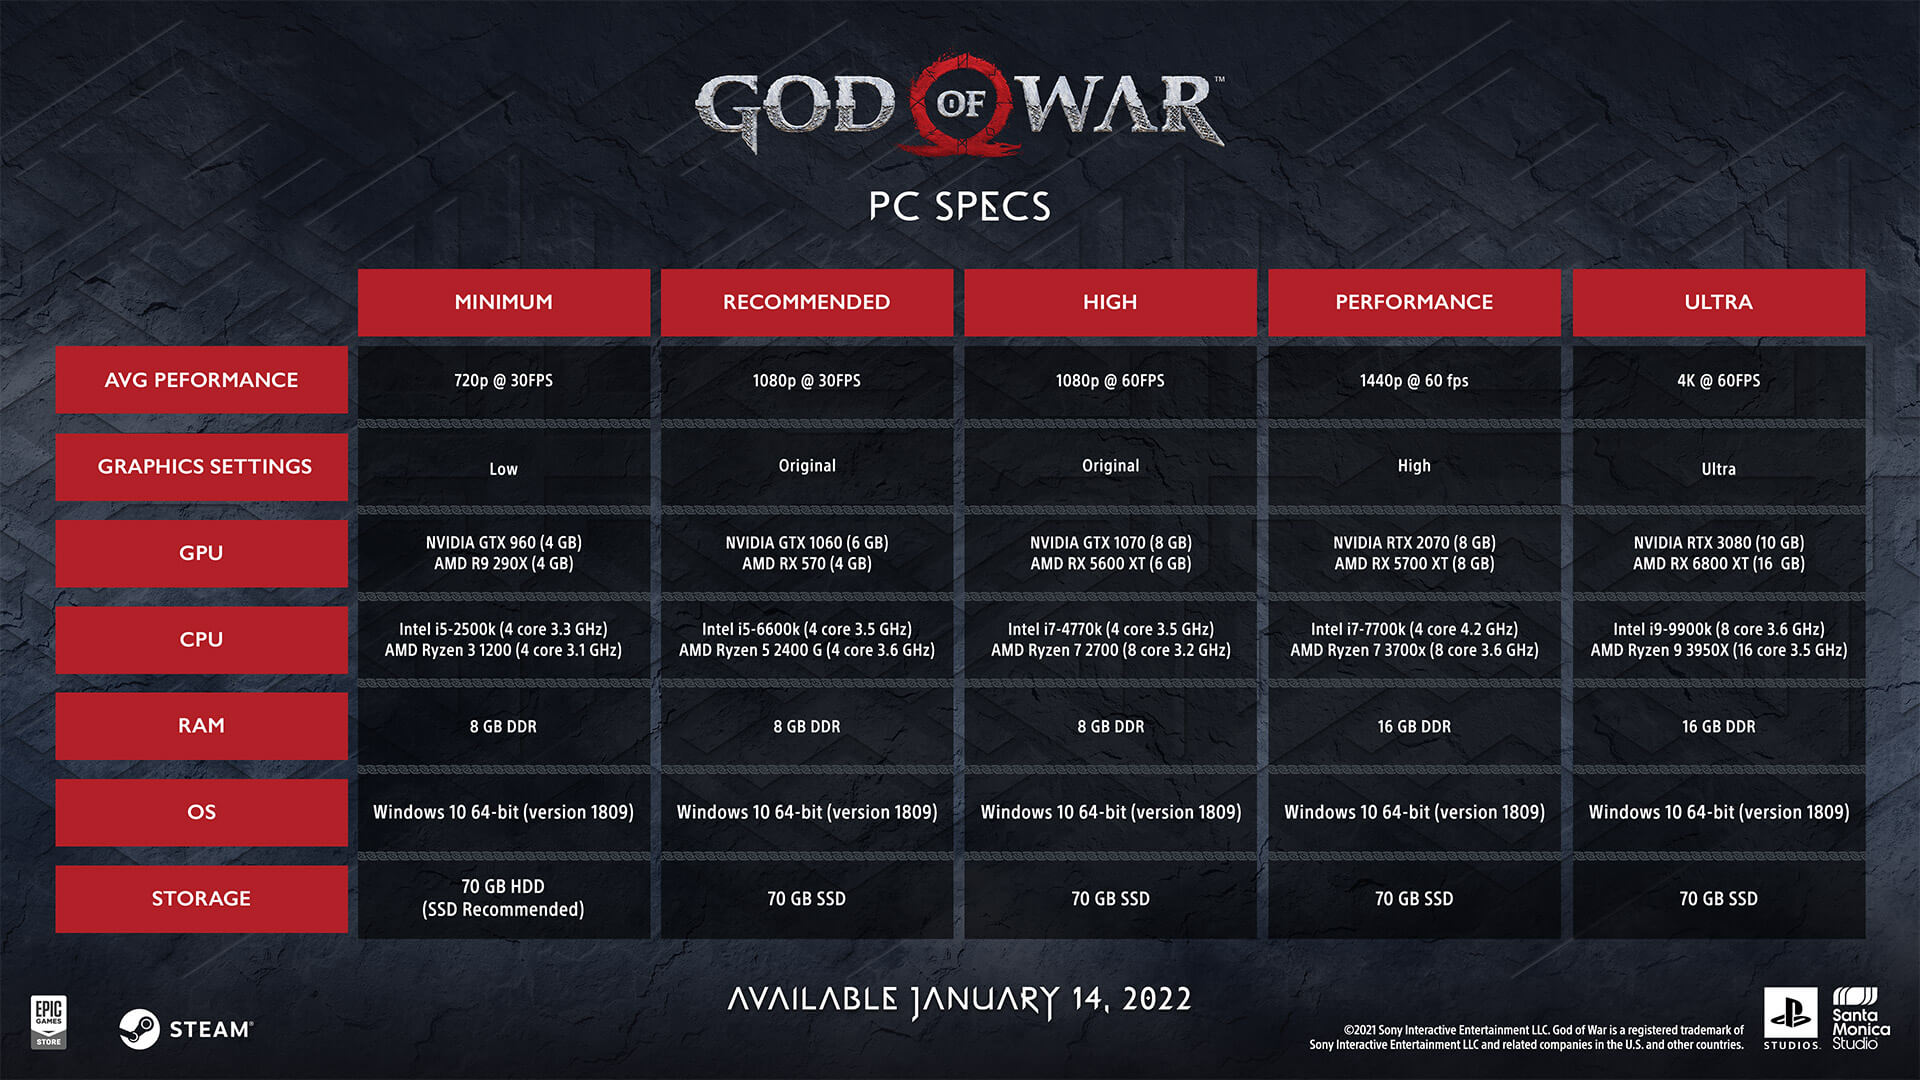 God of War PC Requirements